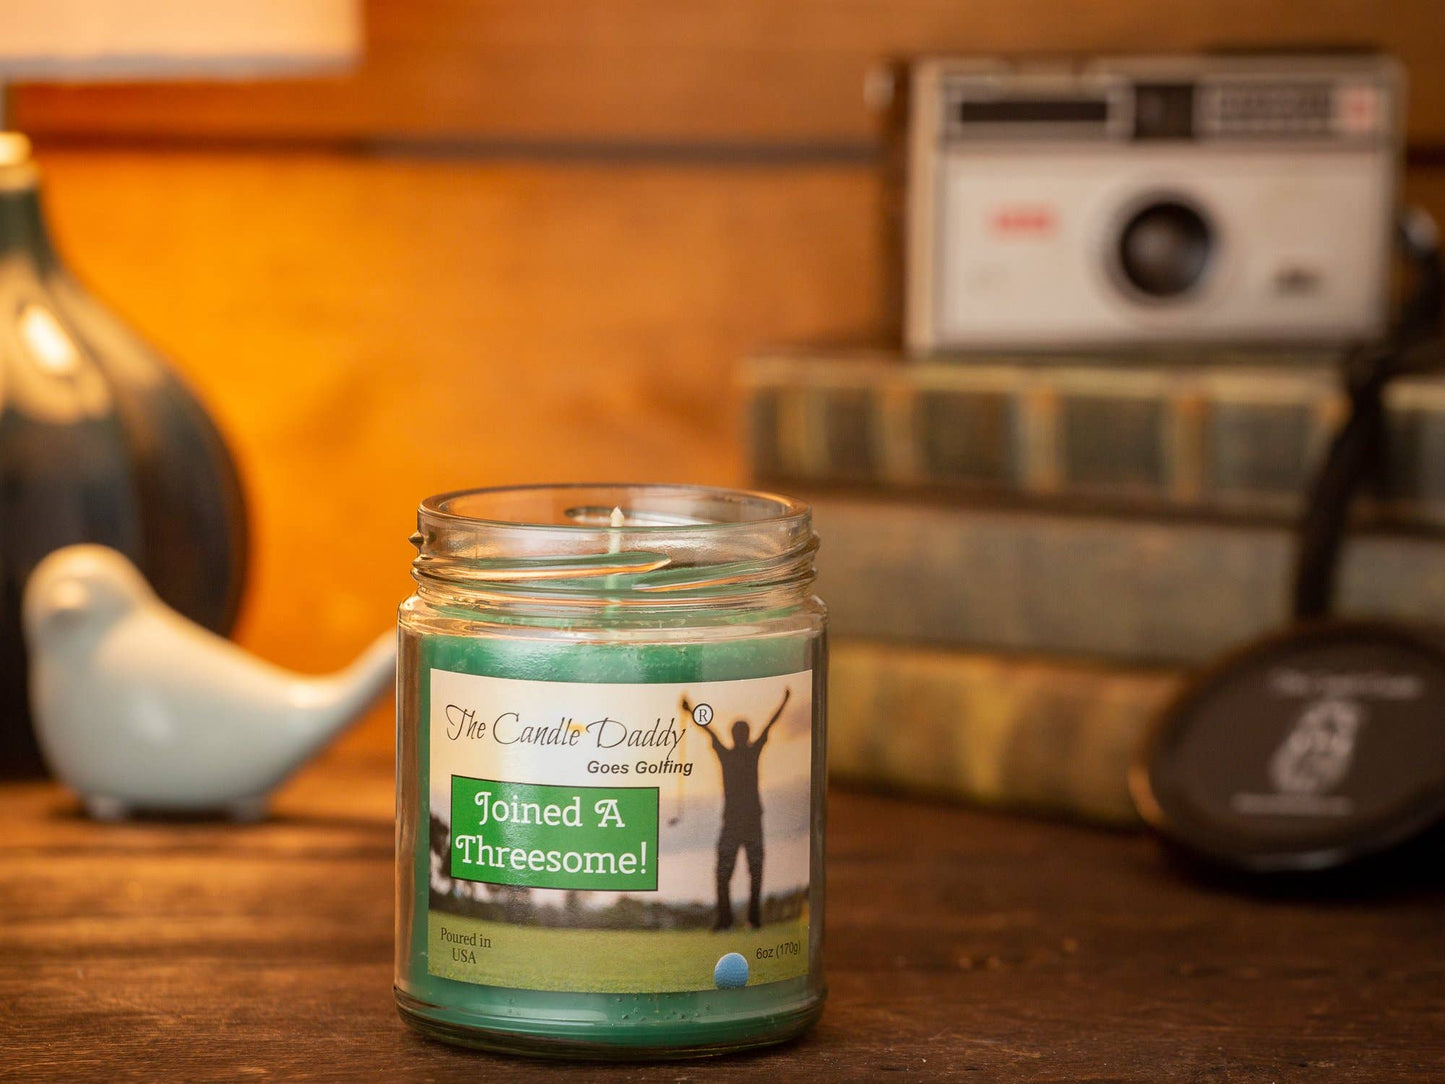 Joined a Threesome 6oz Jar Candle (Fairway Scent)